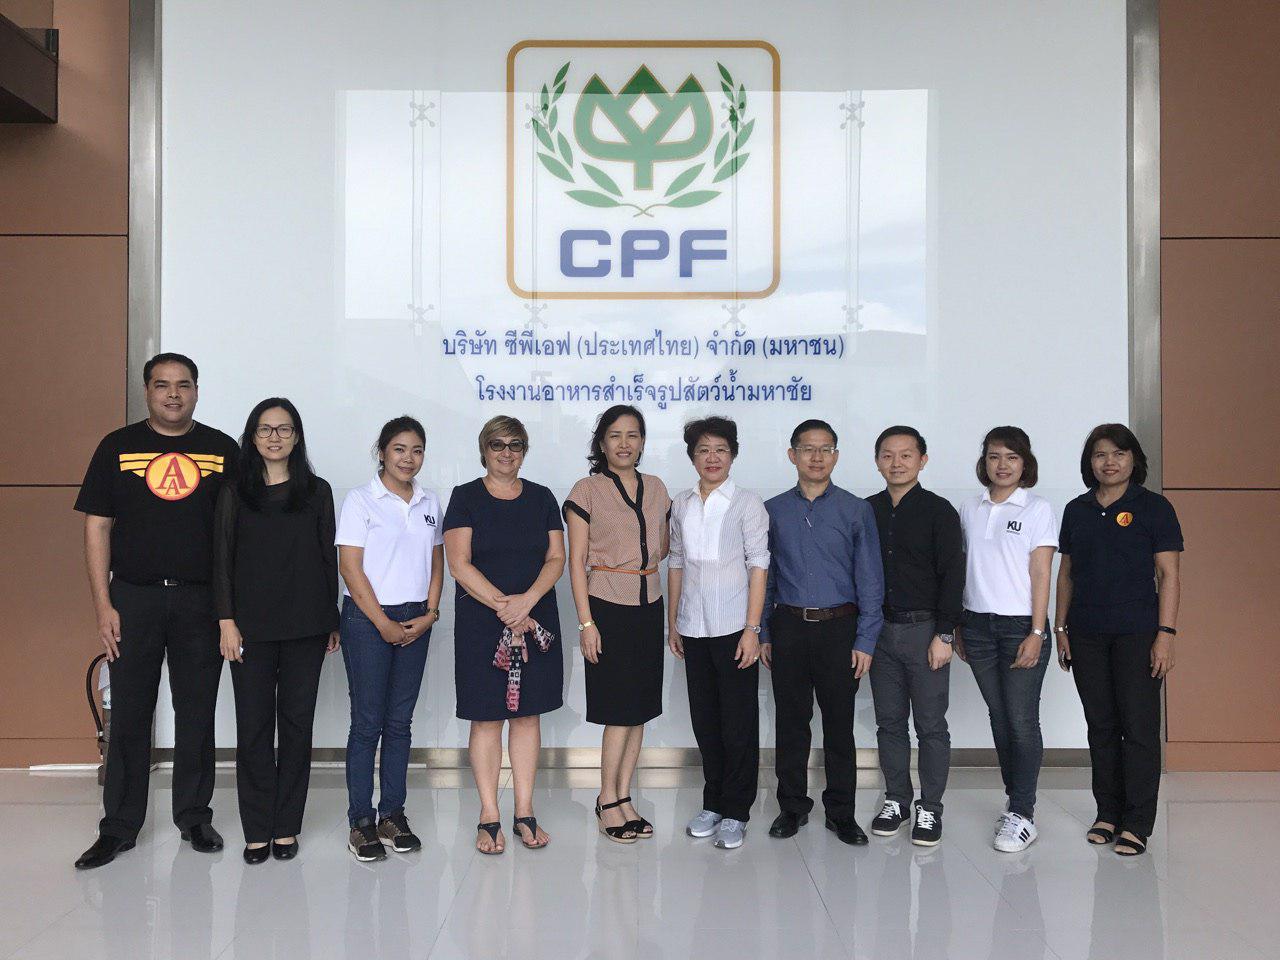 Tour visit to CP-Food company in Samut Prakan province Thailand on August 18th, 2017